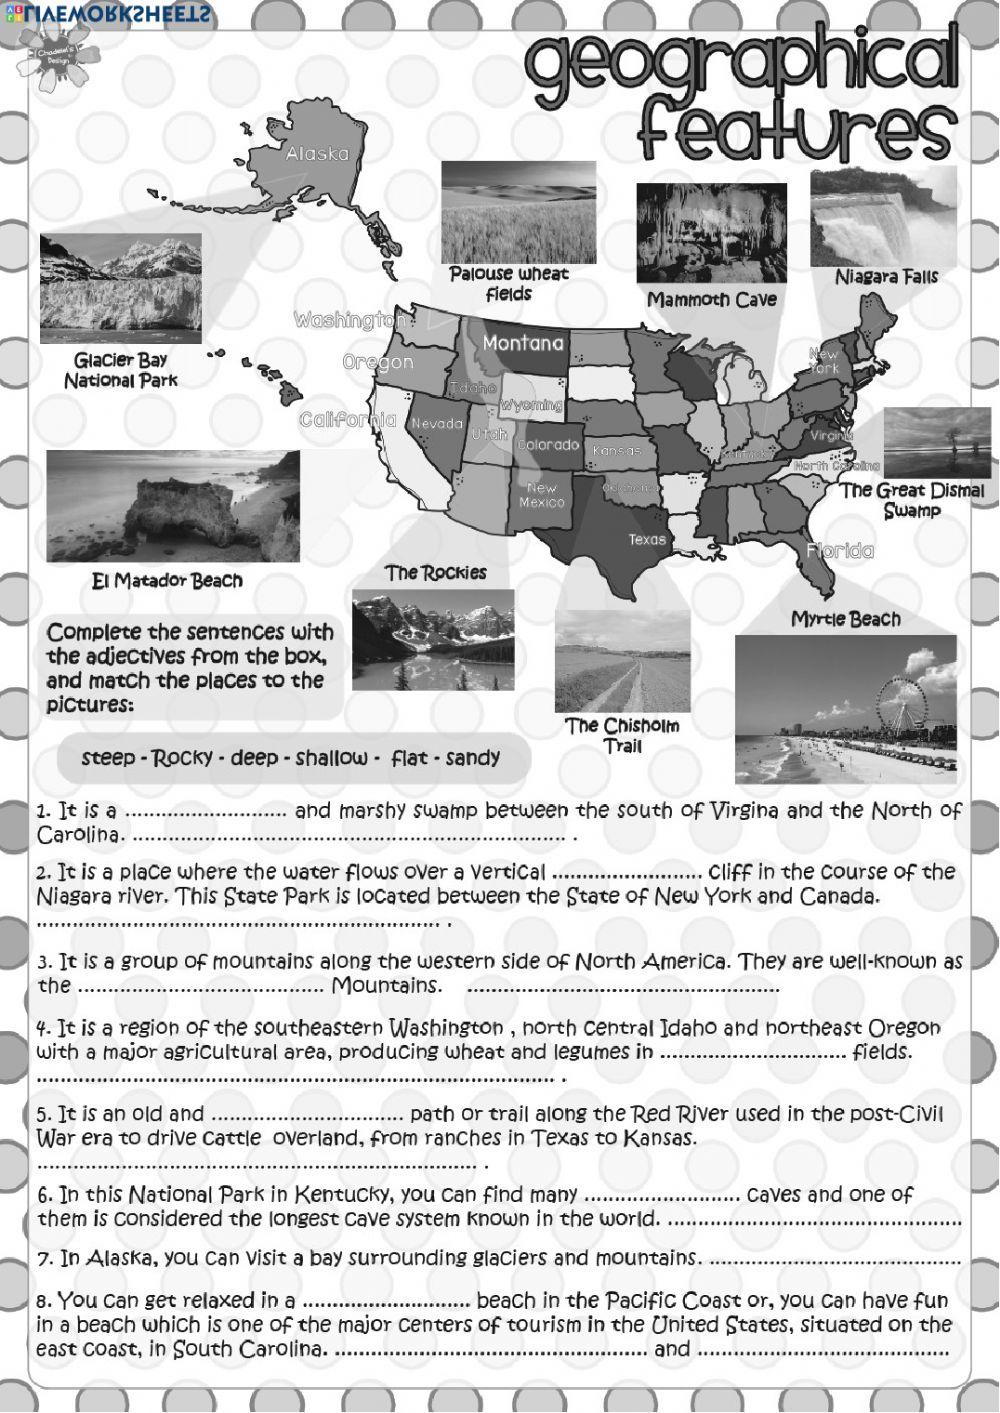 USA - geographical features